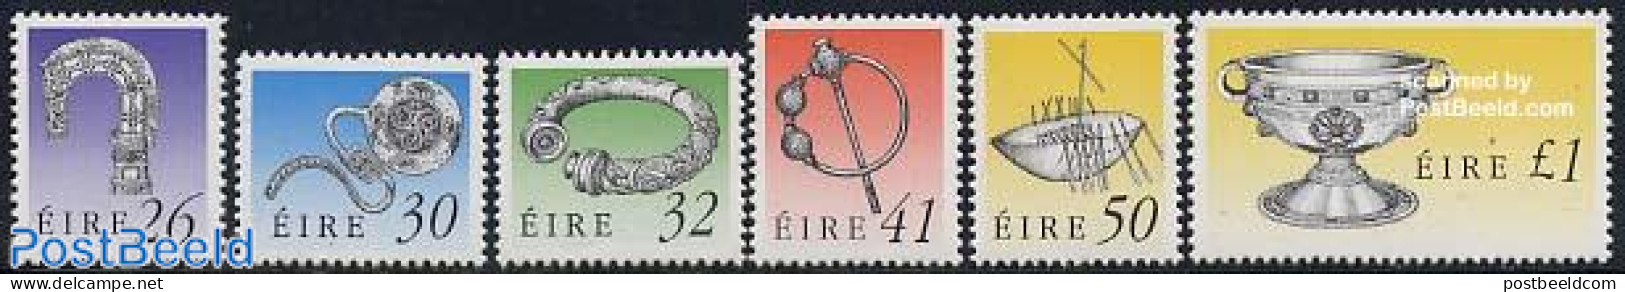 Ireland 1990 Definitives 6v, Mint NH, Art - Art & Antique Objects - Unused Stamps